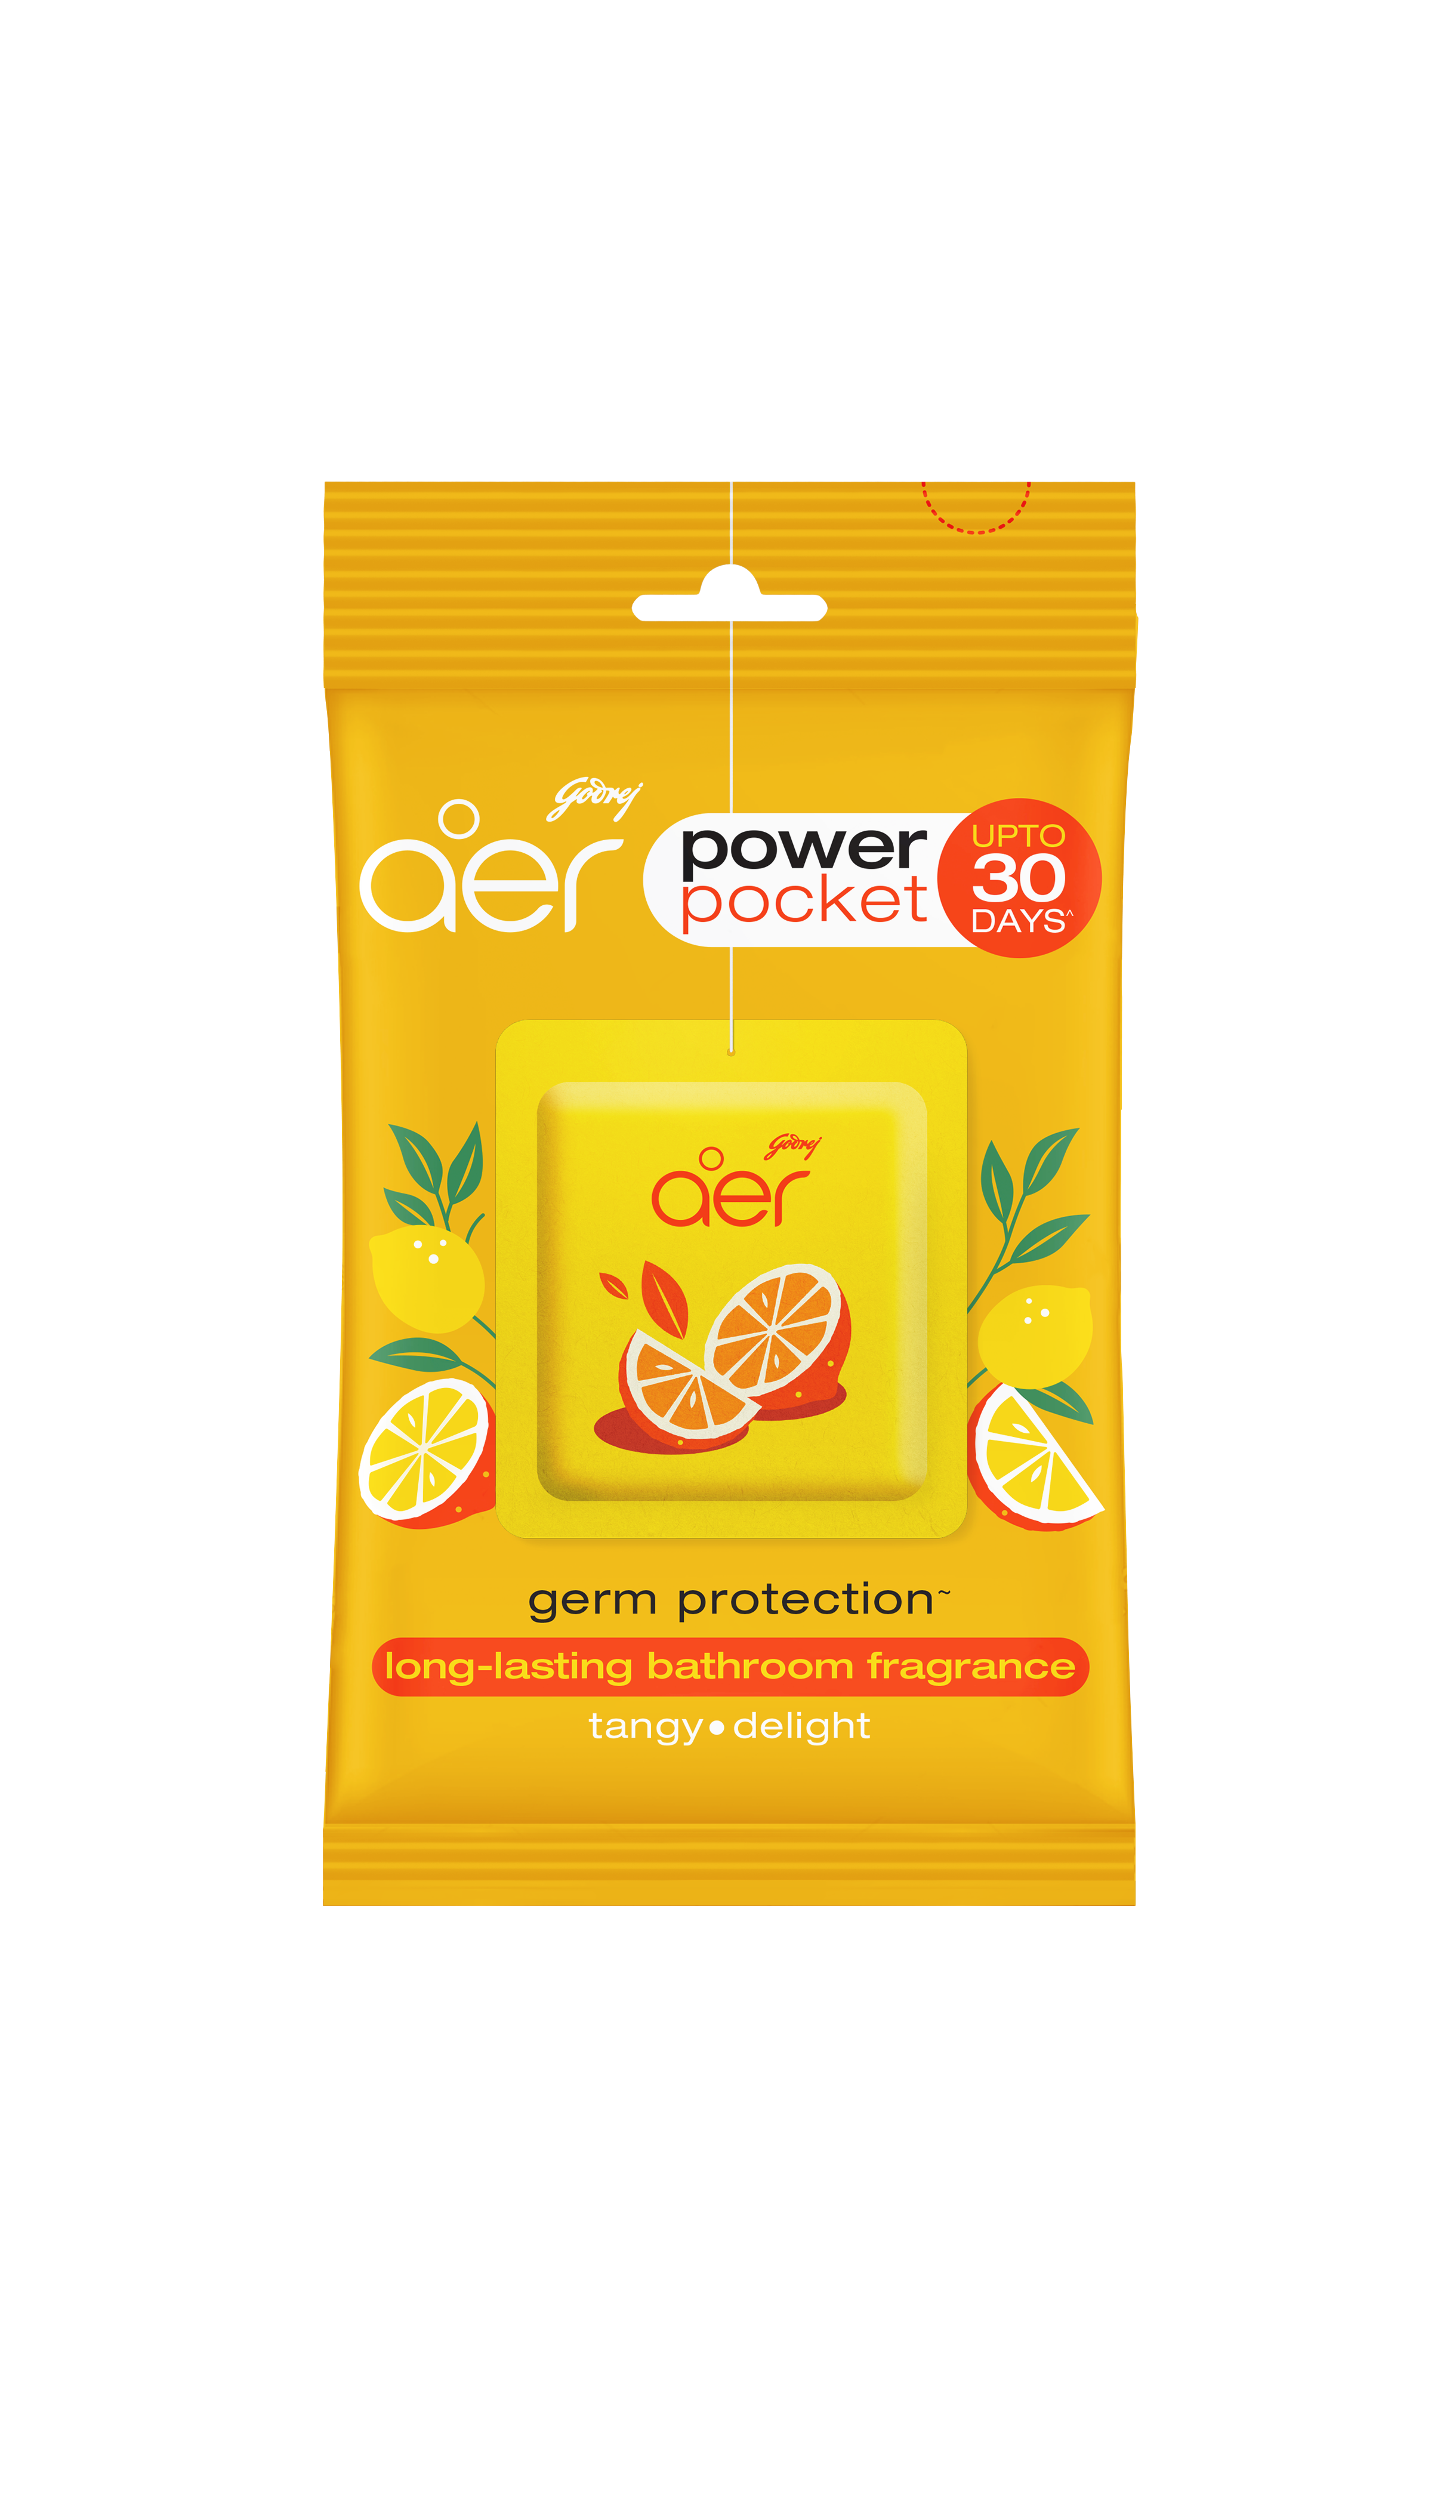 give-your-bathroom-freshness-of-lime-with-godrej-aer-power-pockets-new-variant-tangy-delight